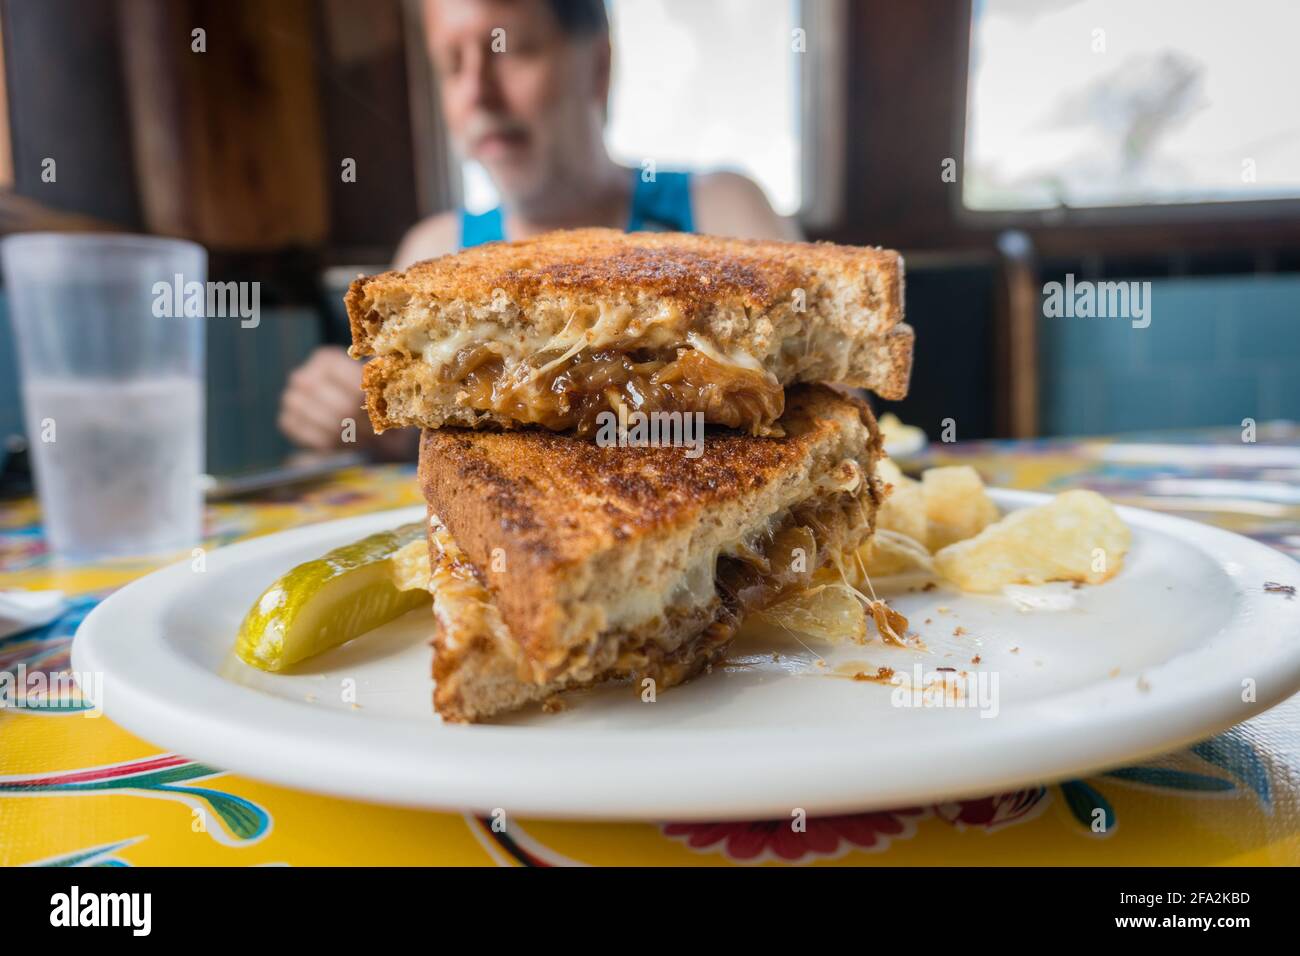 Man in background at diner with close up of delicious looking grilled cheese sandwich in foreground Stock Photo